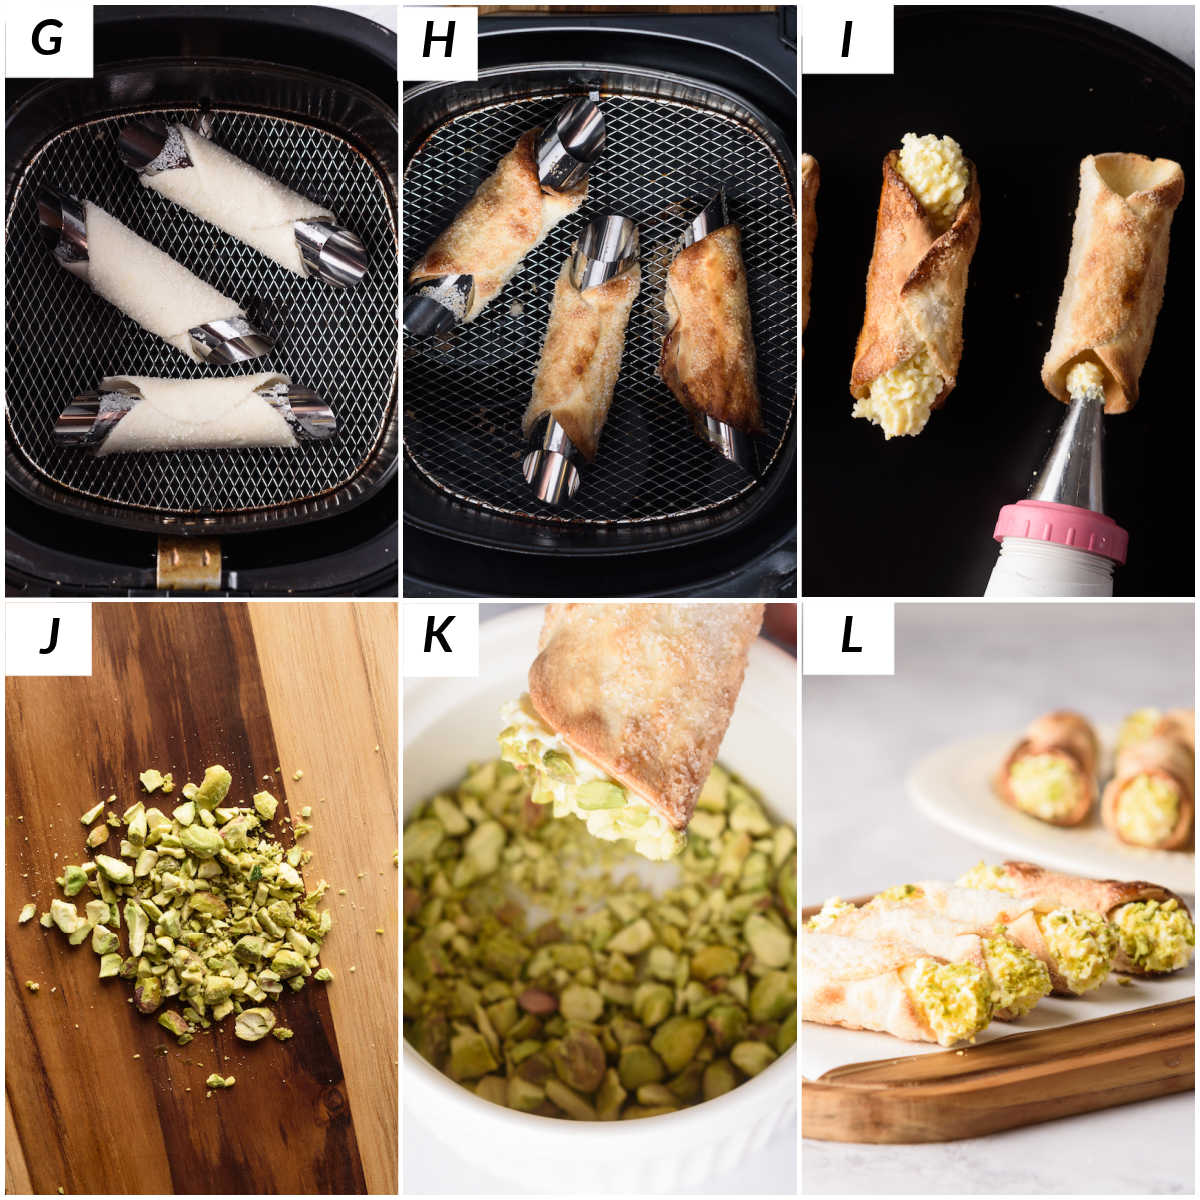 image collage showing the final steps for making air fryer cannoli